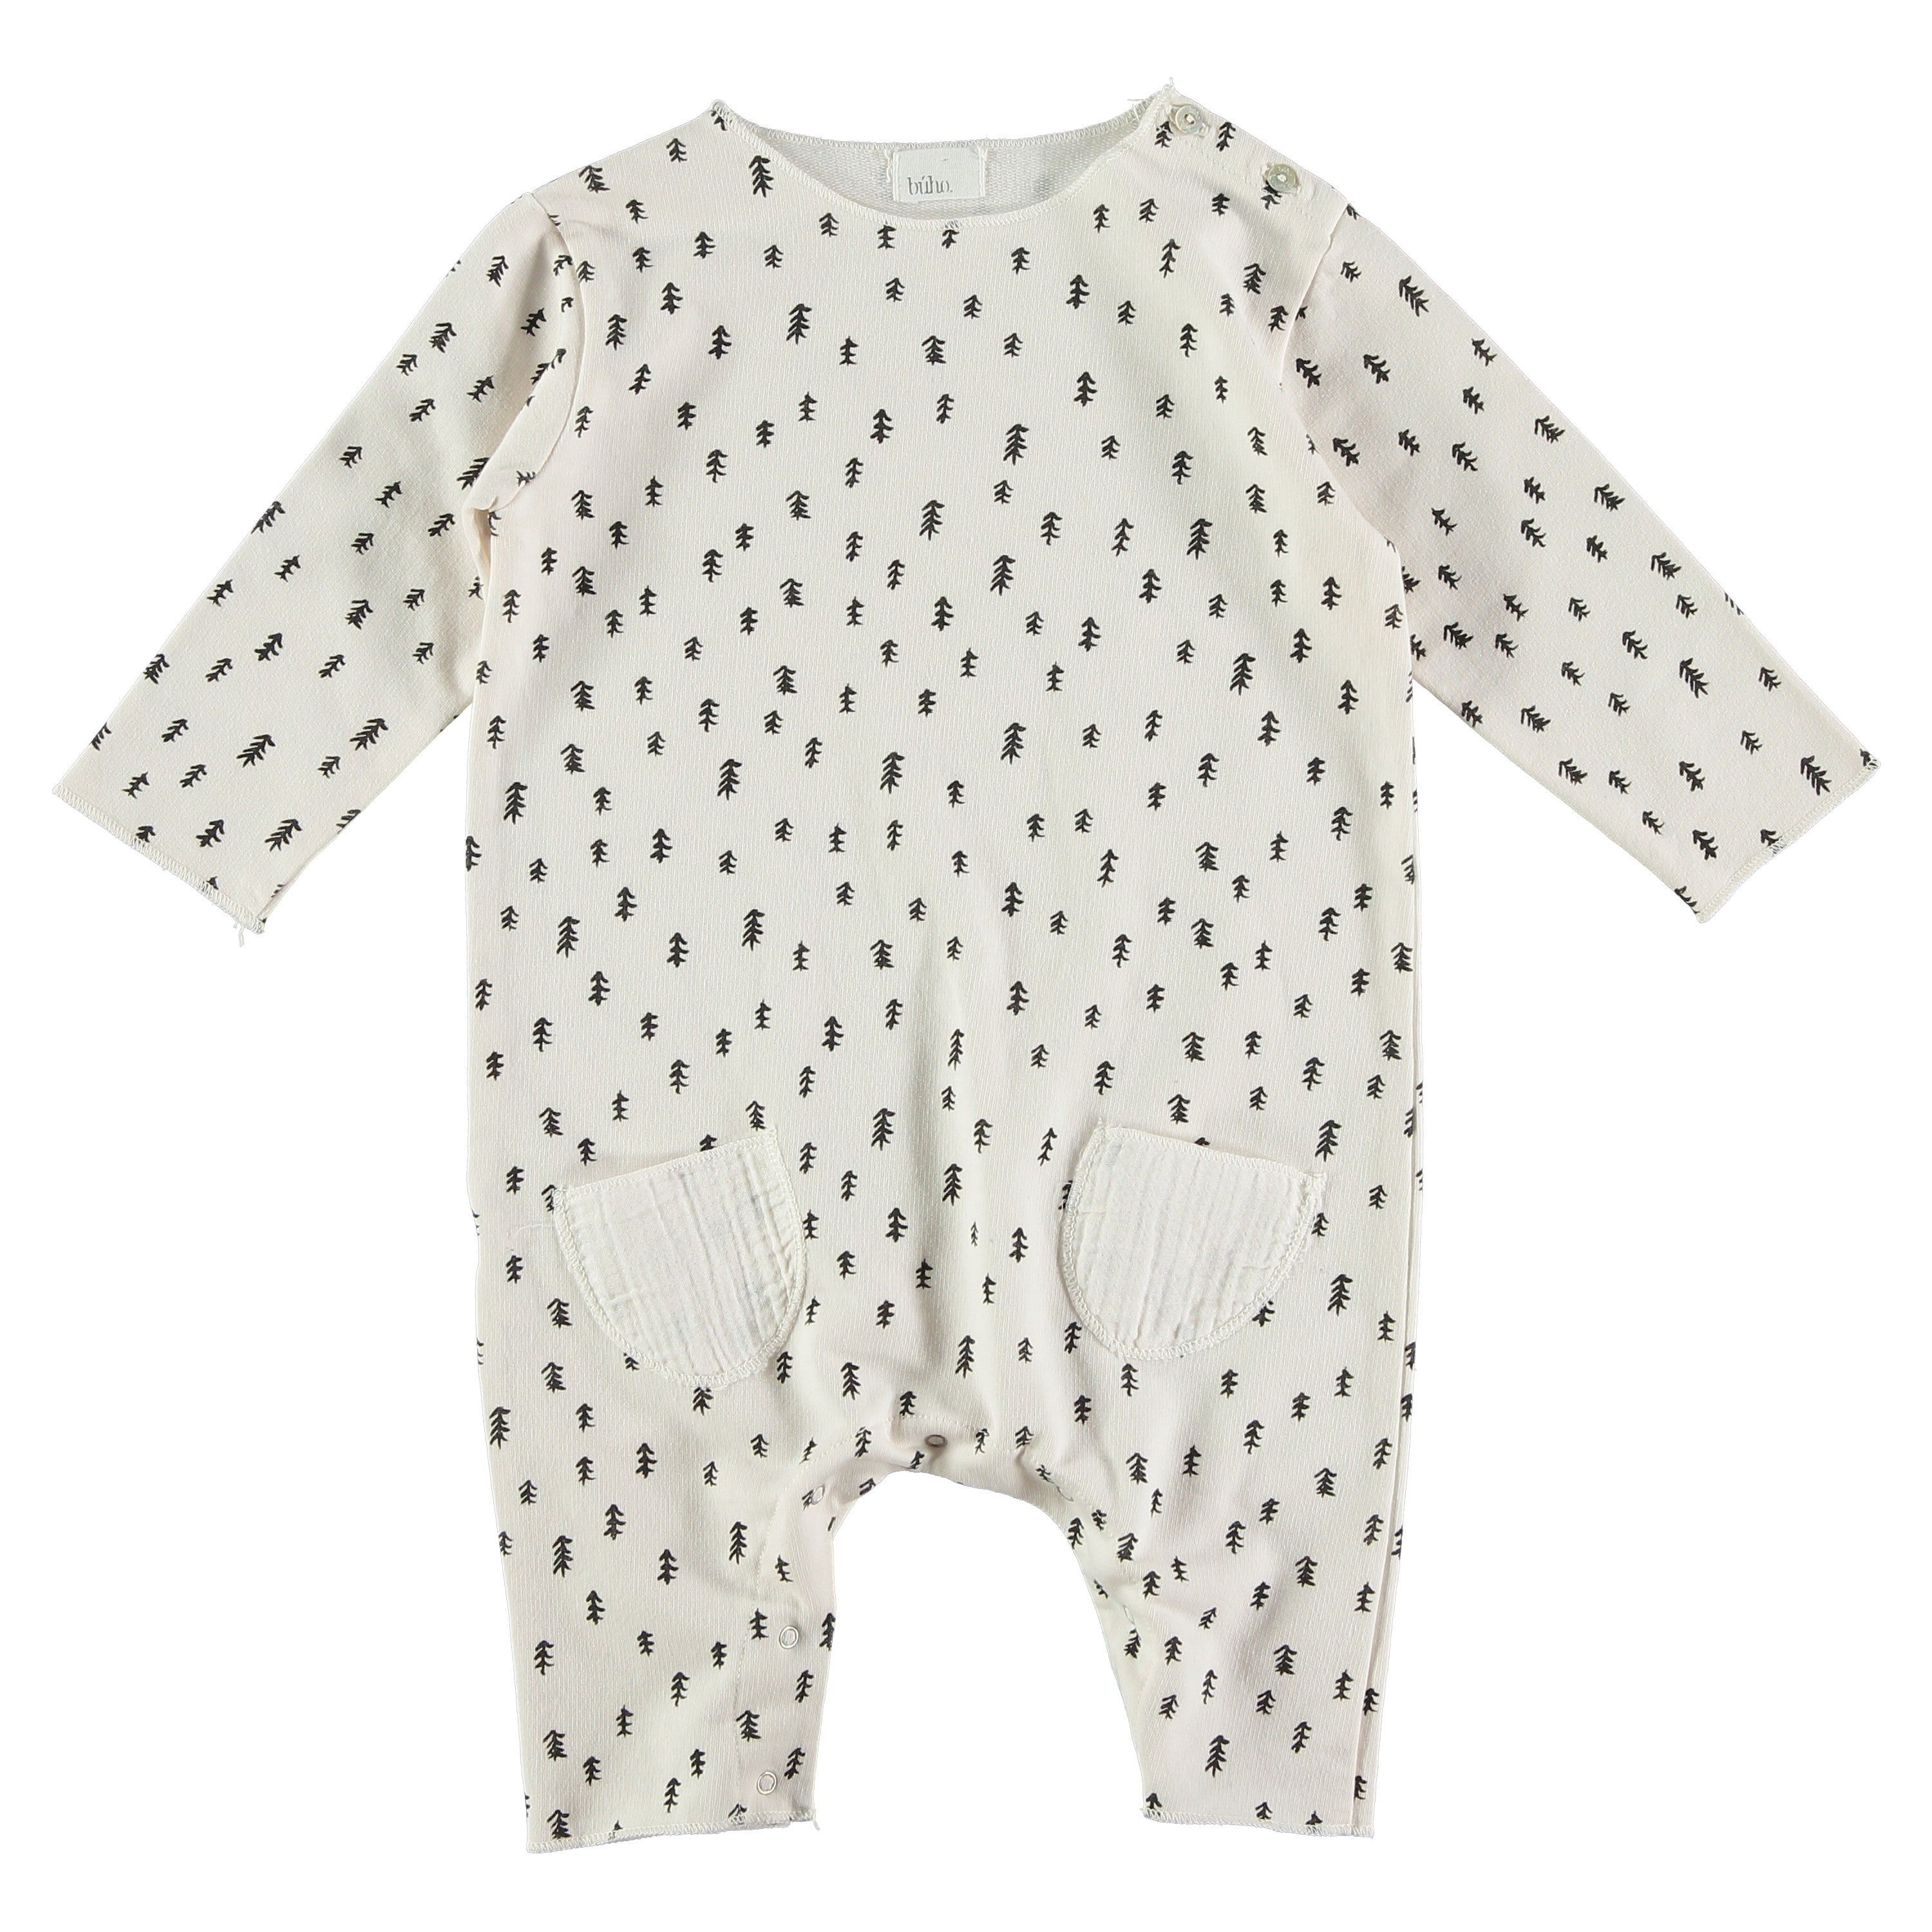 Buho Barcelona baby Jumpsuit at Bonjour Baby Baskets